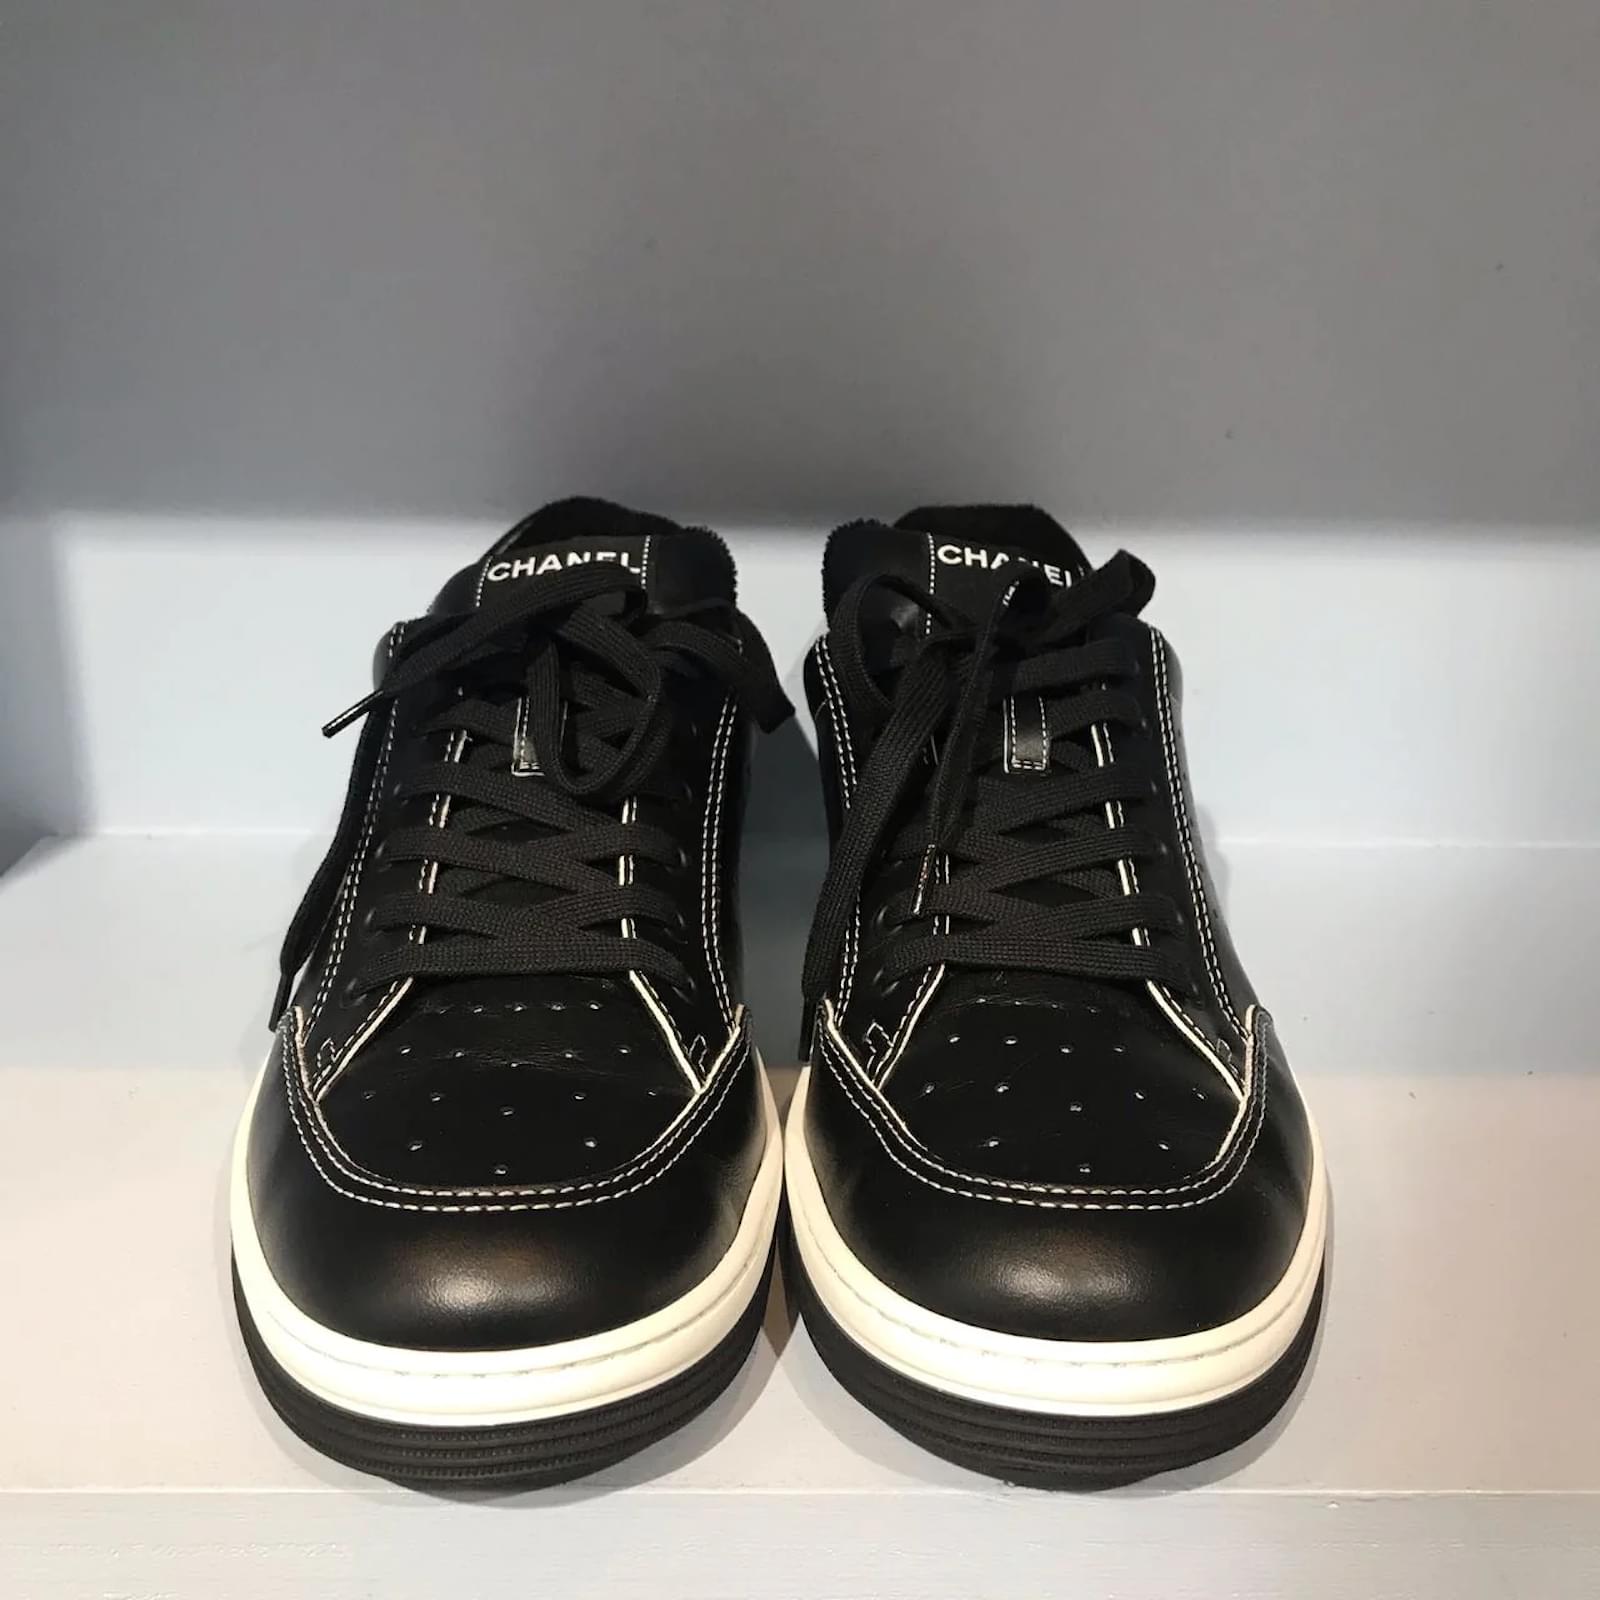 Sneakers Chanel Chanel Trainers T.eu 45 Leather Size 45 EU